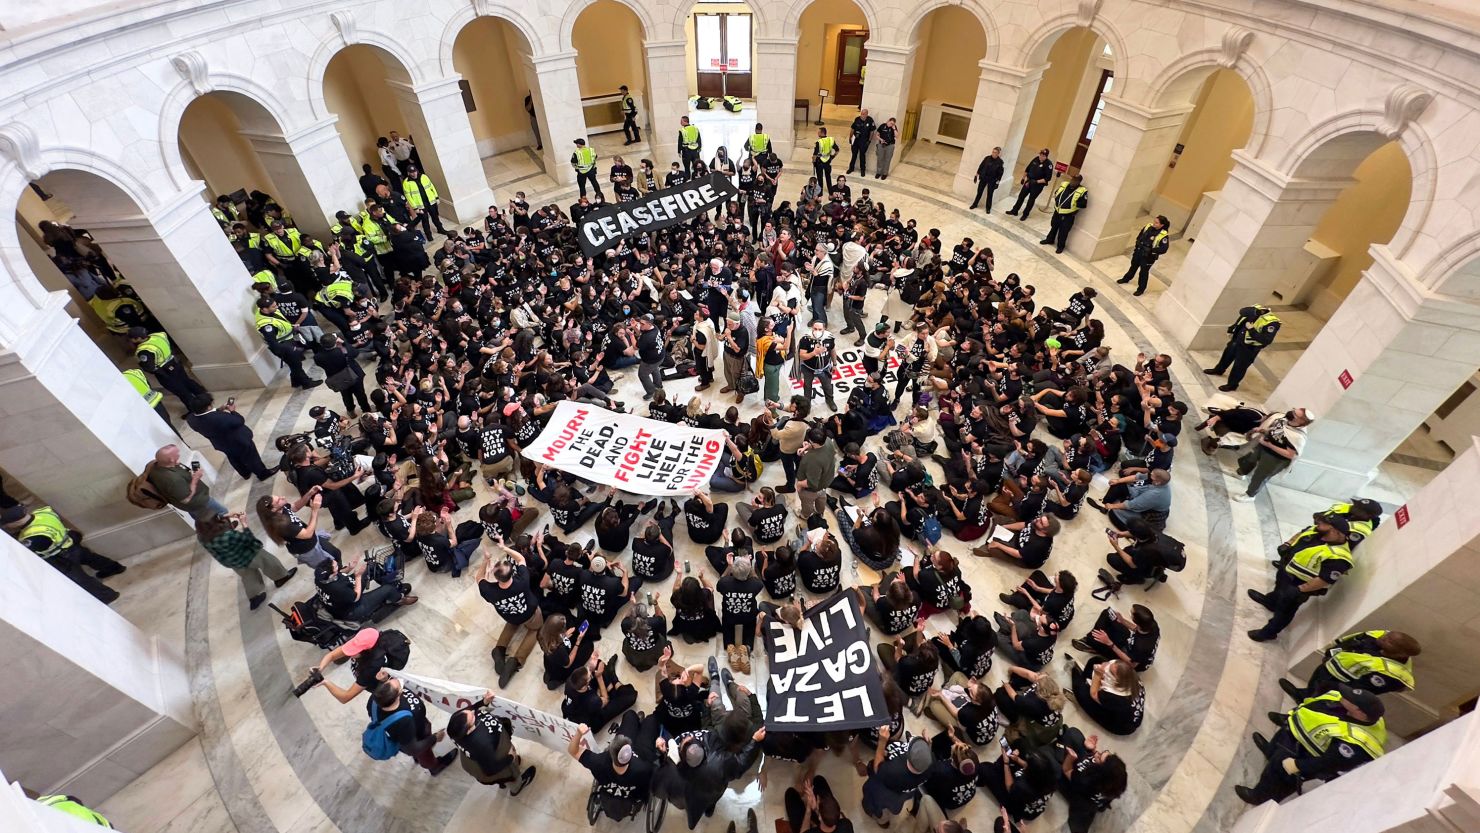 Jewish peace activists staged a sit-in on Capitol Hill, where they called for an immediate ceasefire in the Israel-Gaza war on October 18.